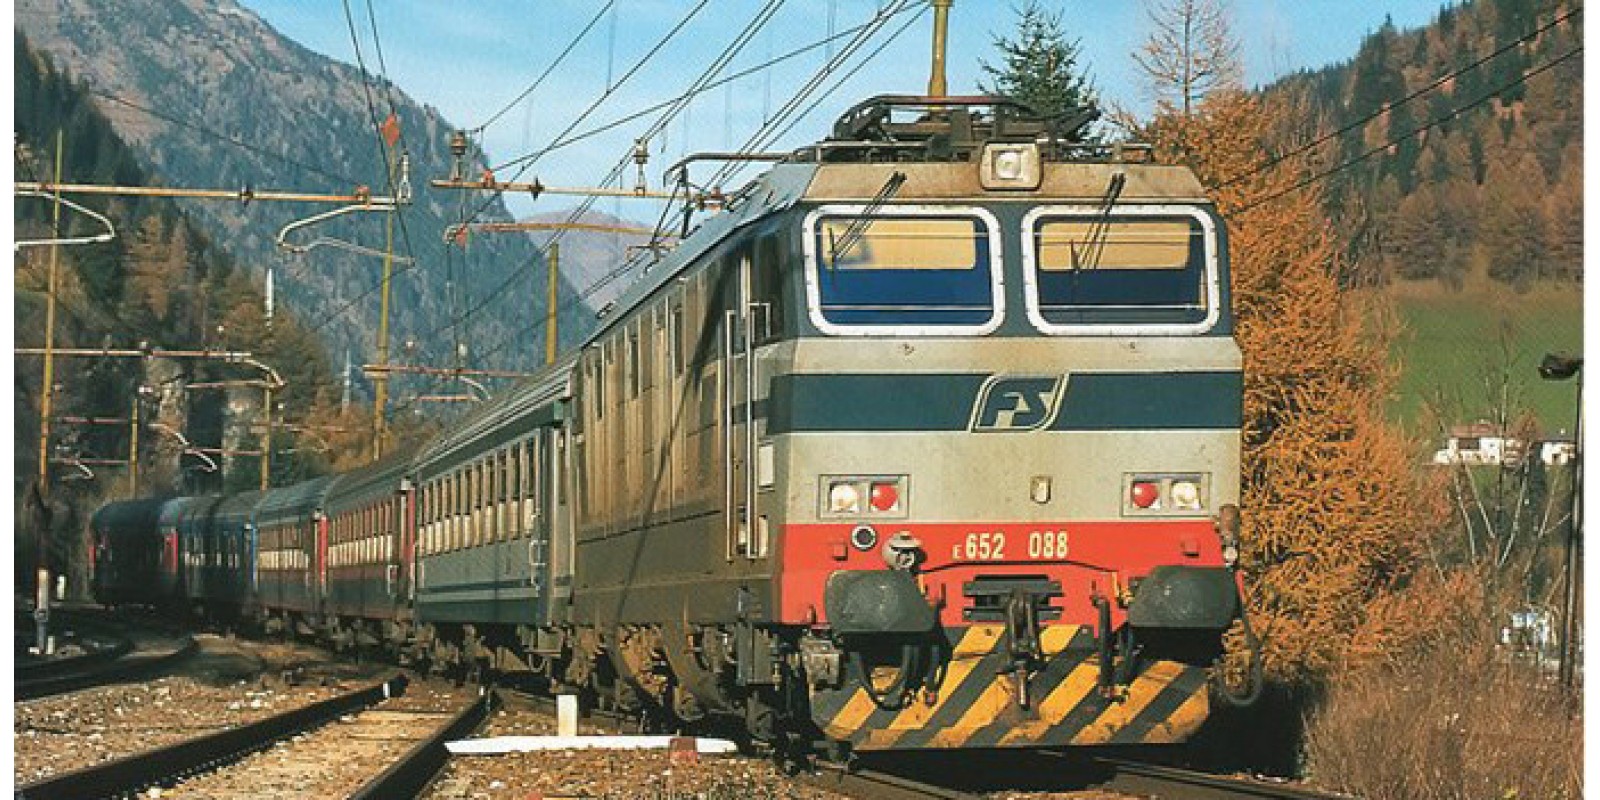 RI2701 FS, E.652 088 in original livery with big frontal running number, ep. IV-V